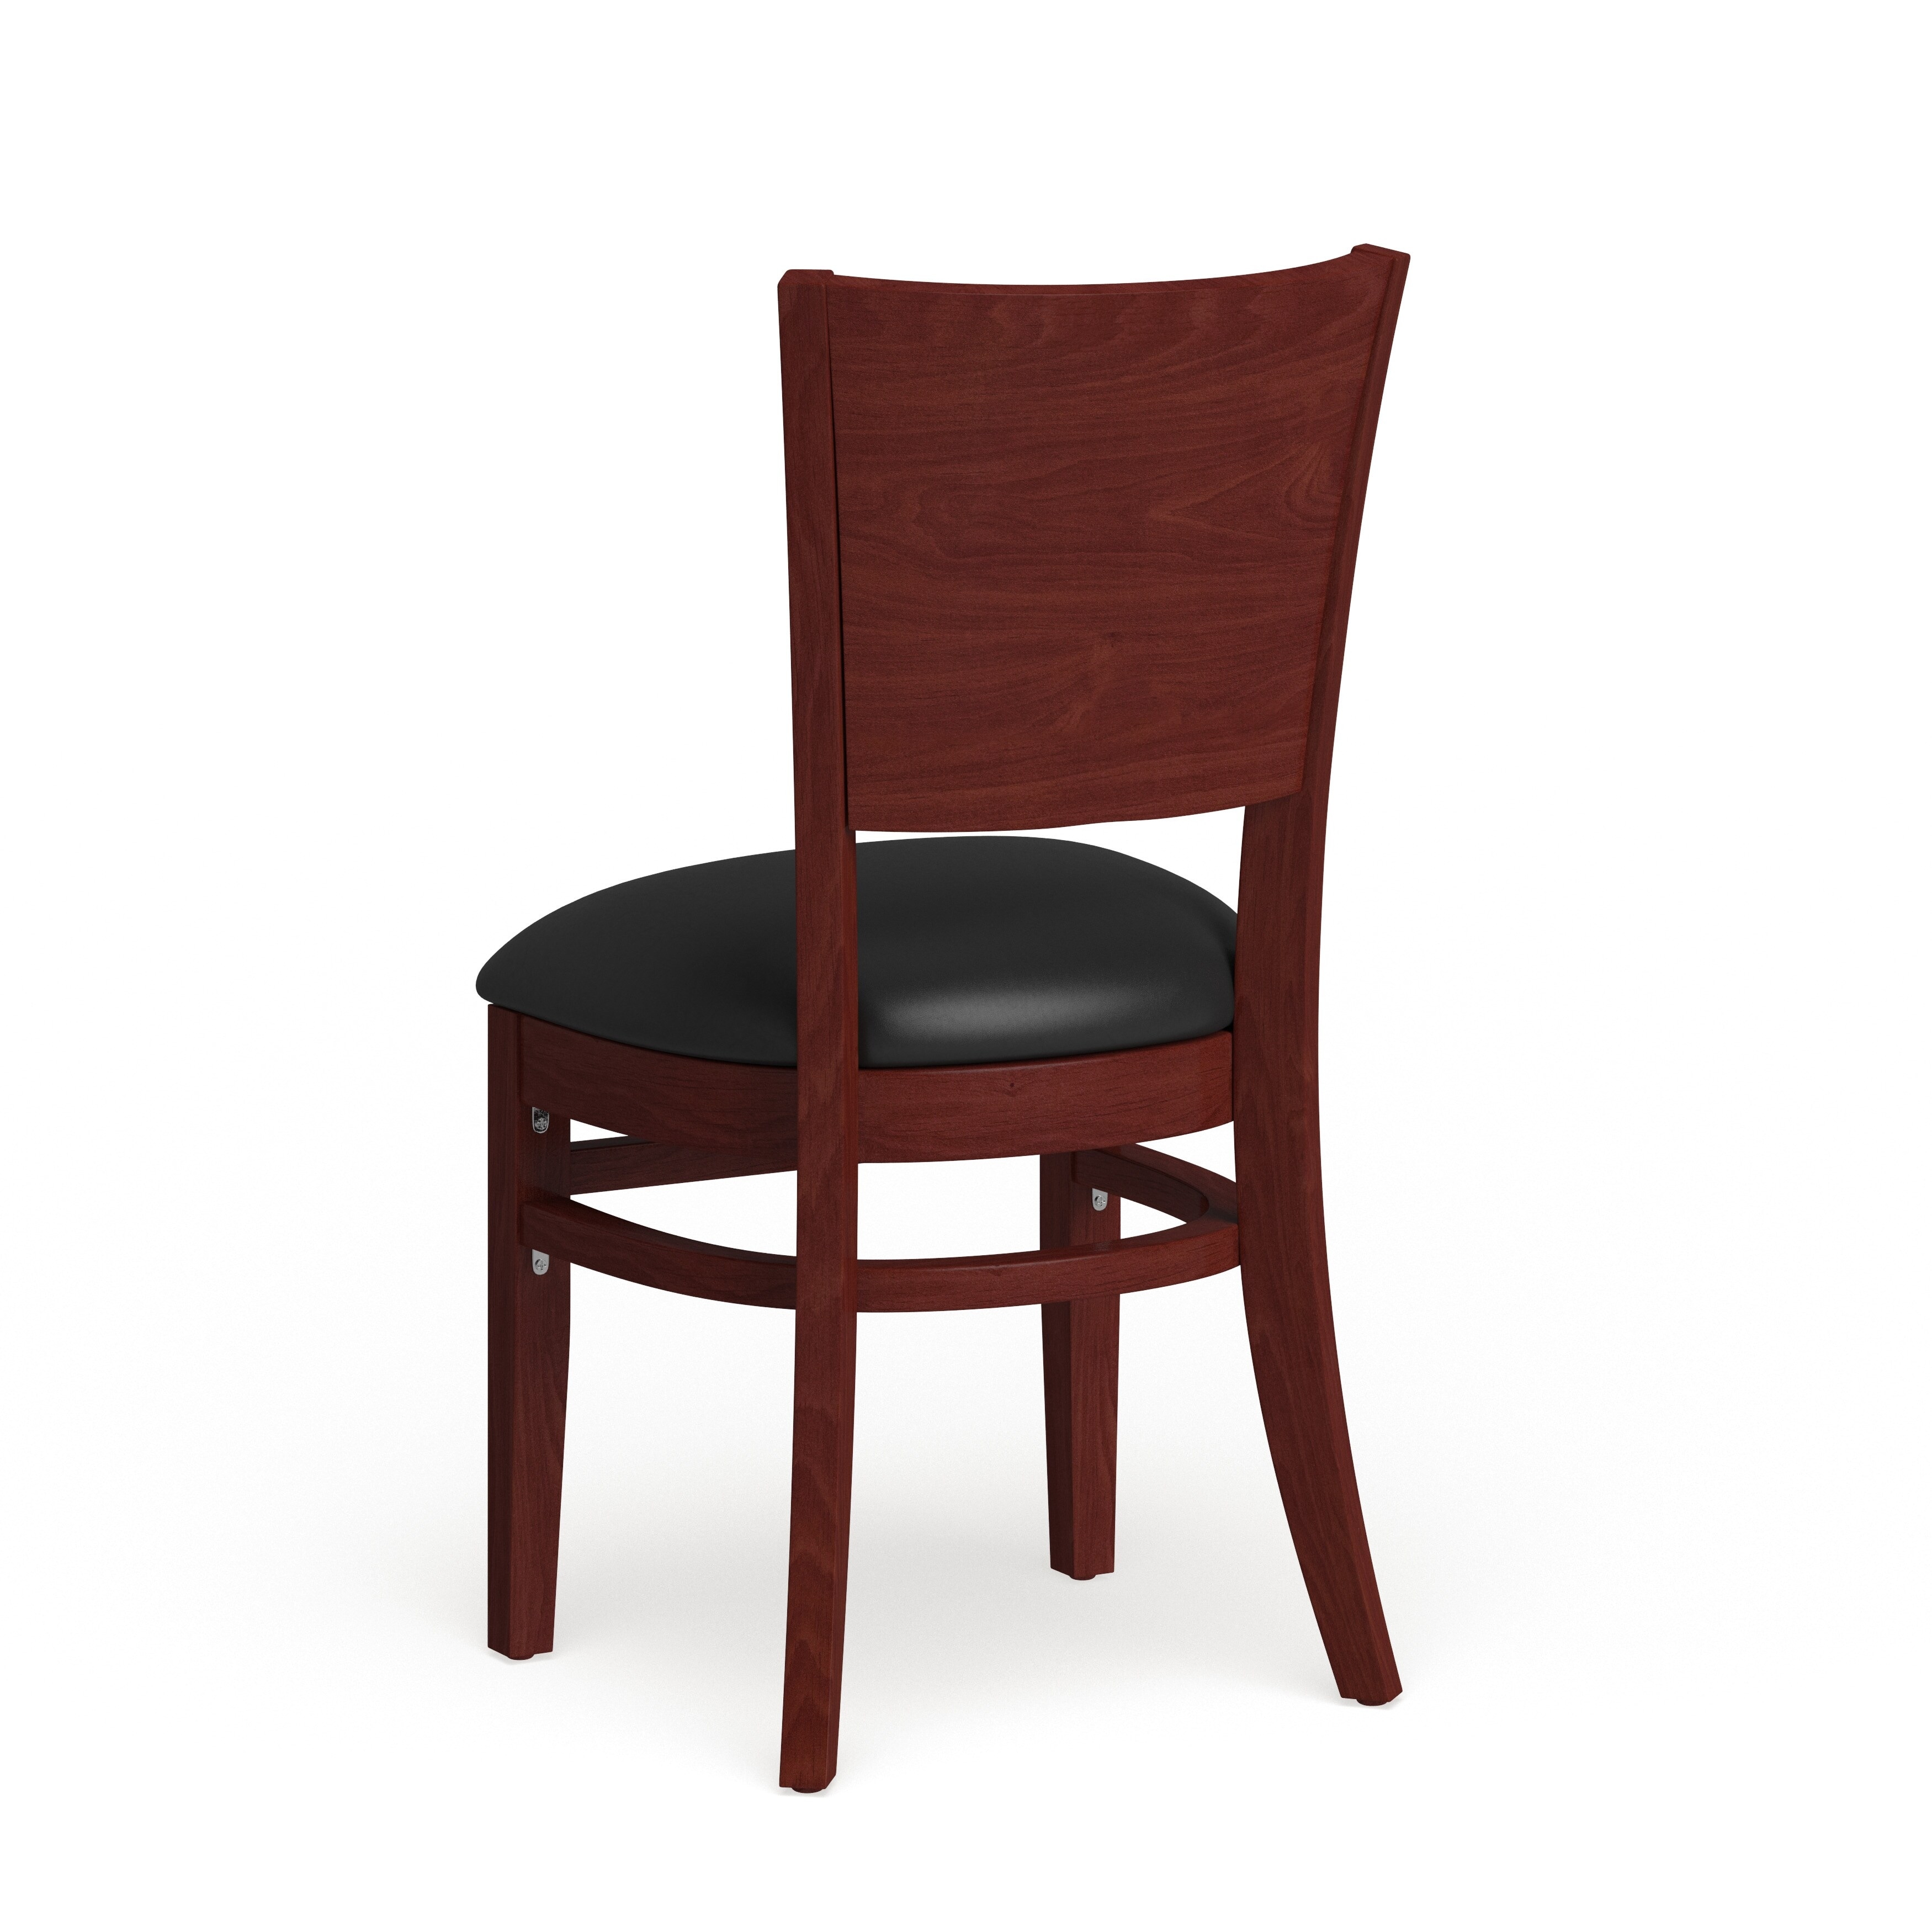 Solid Back Wooden Restaurant Chair - 17.25"W x 20.5"D x 33.5"H